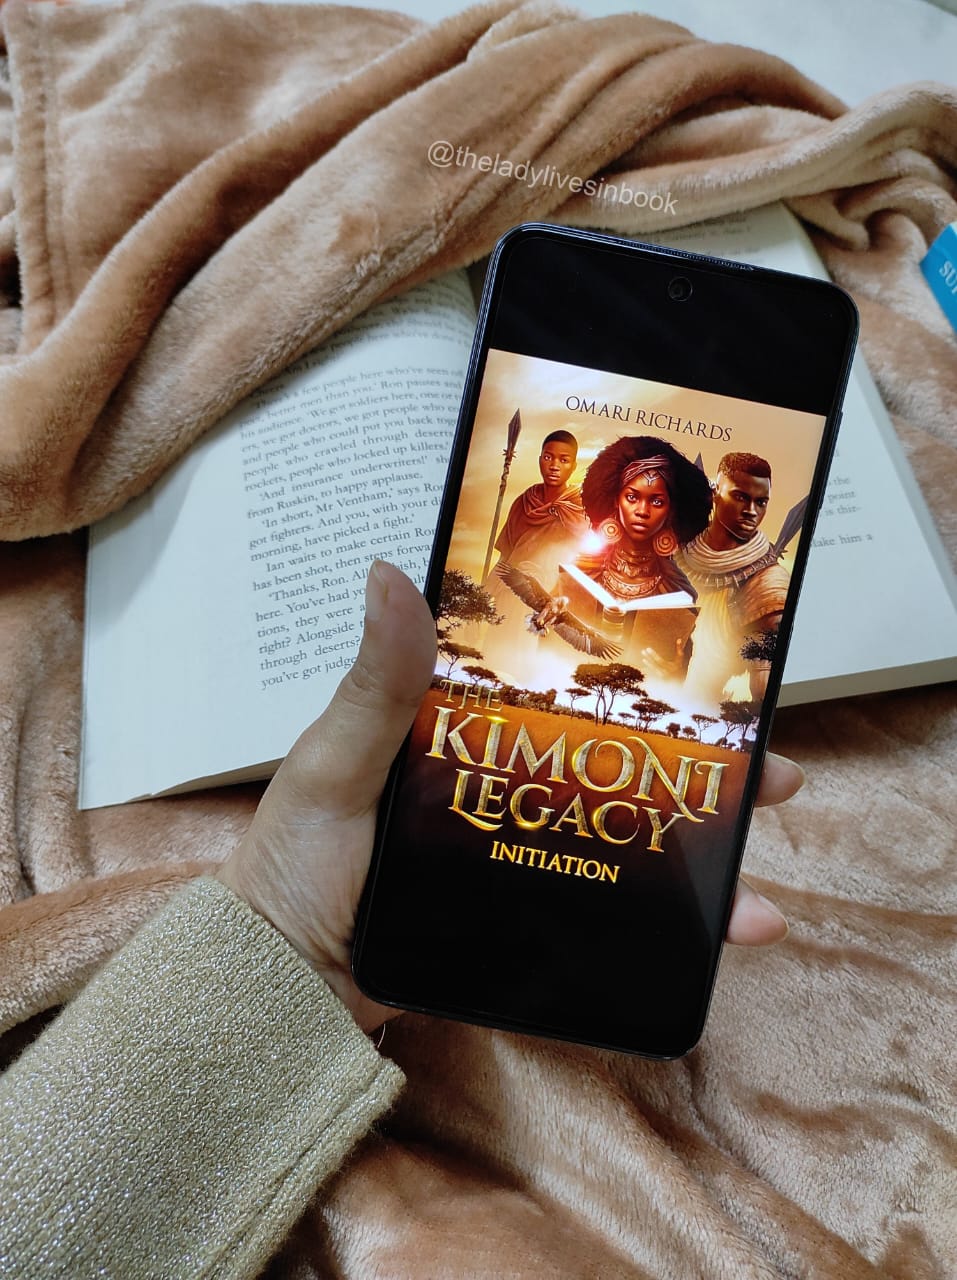 The Kimoni Legacy, Omari Richards made a magnificent literary expedition – Book Review